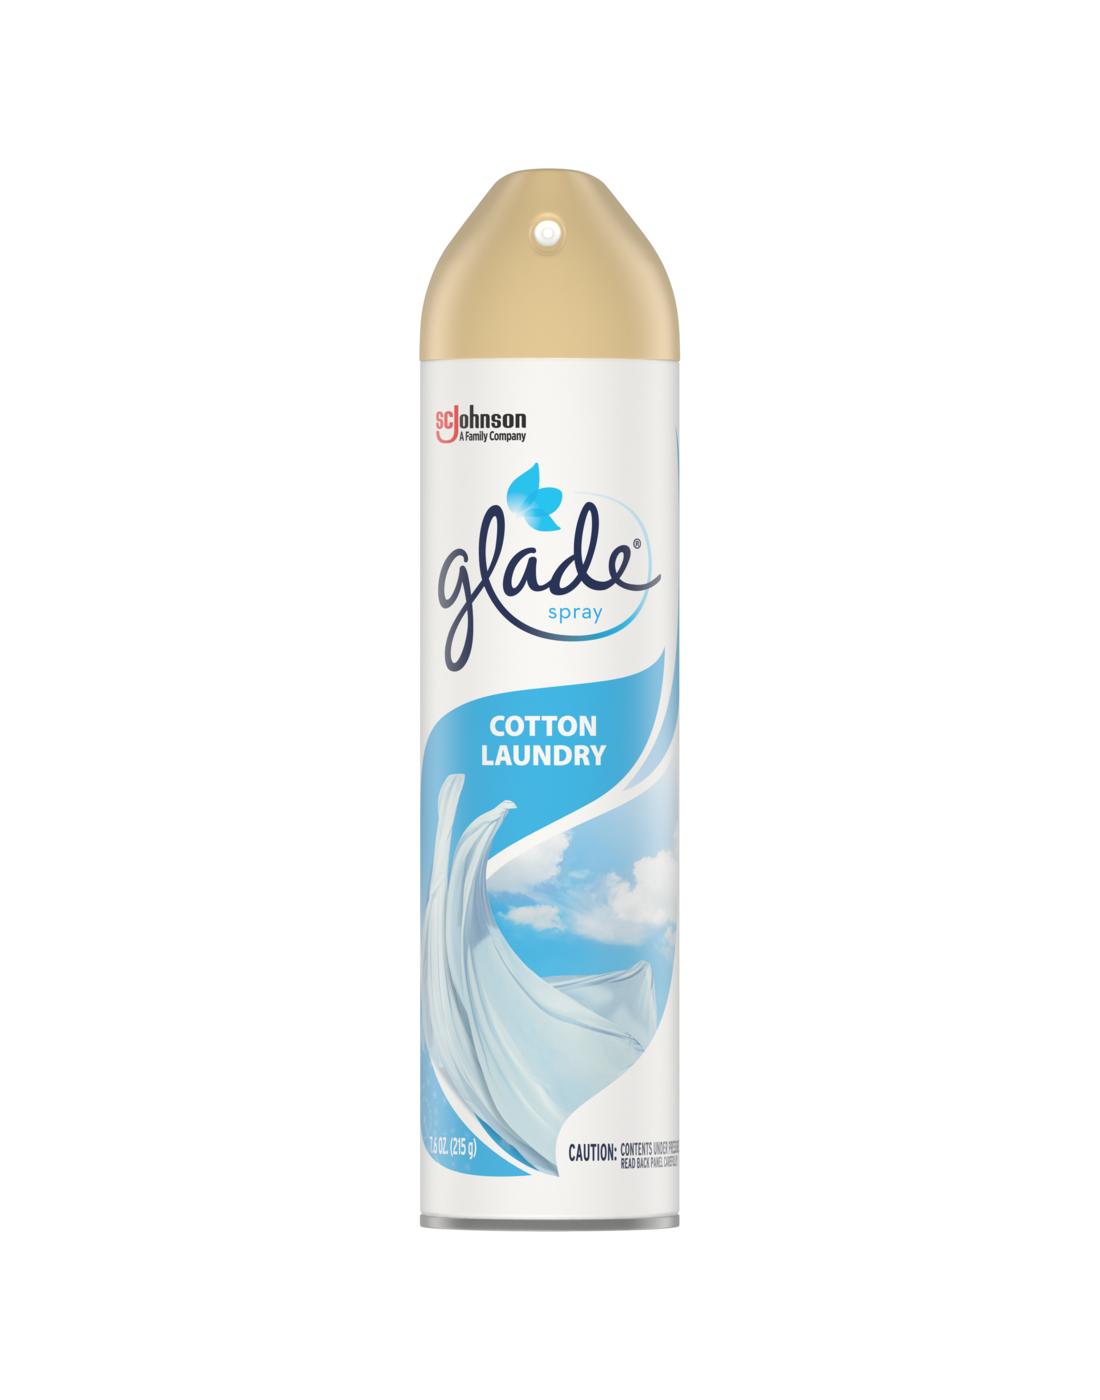 Glade Cotton Laundry Air Freshener Room Spray; image 1 of 2